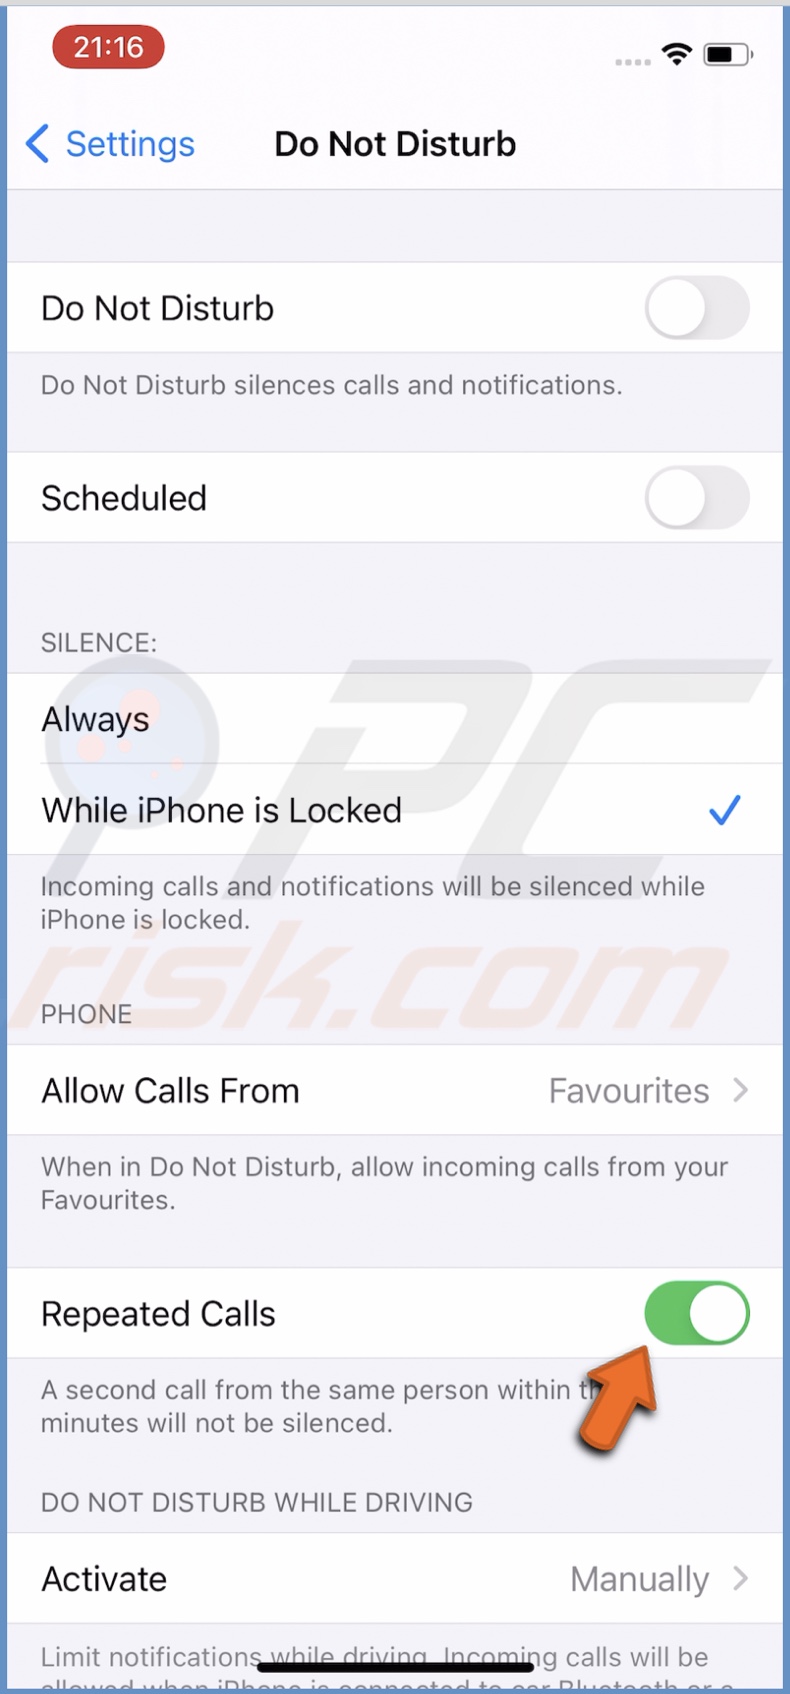 Enable repeated calls